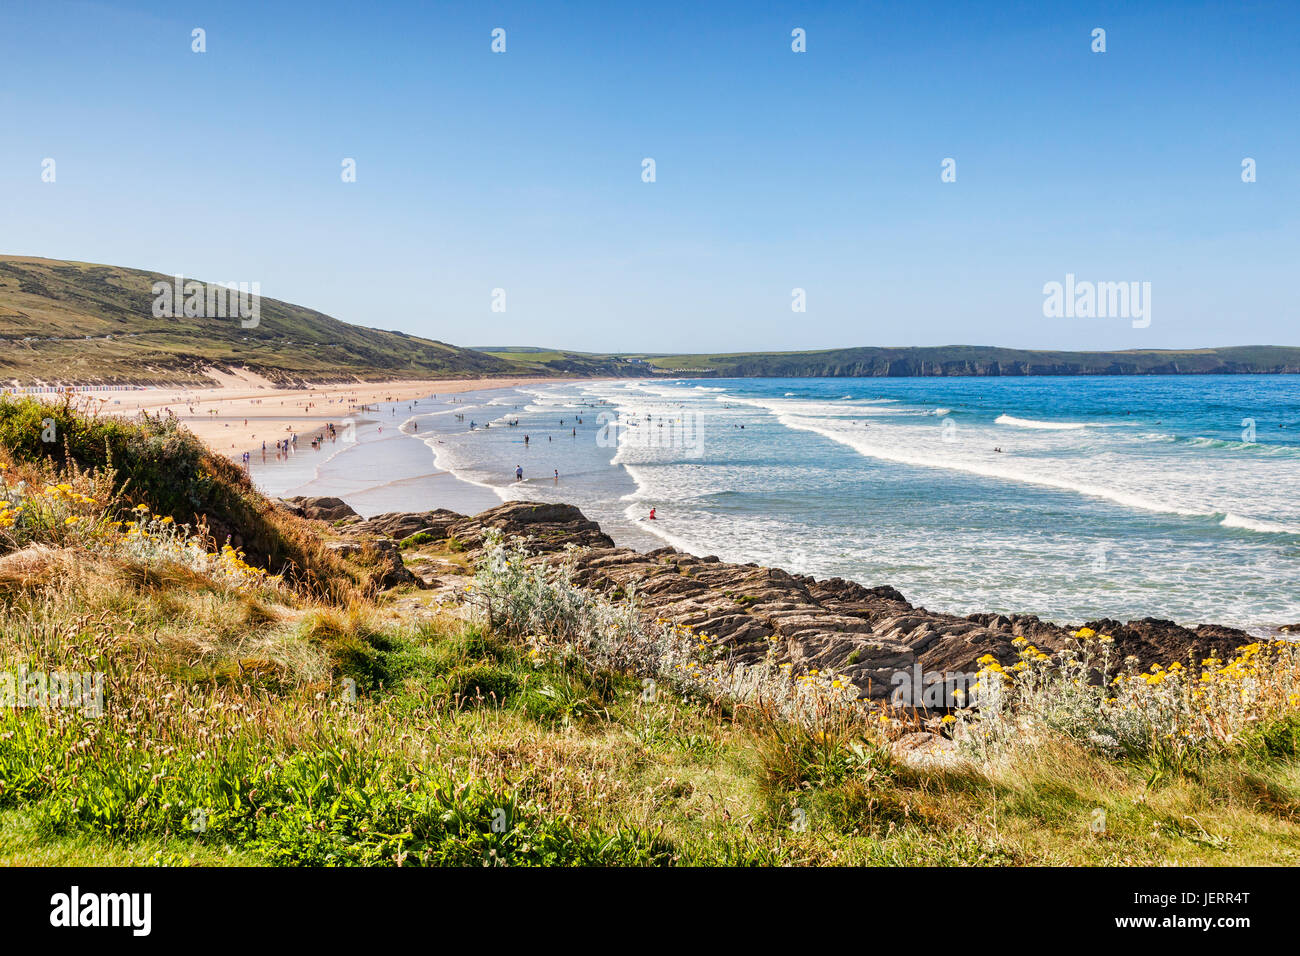 The beach at Woolacombe, North Devon, England, UK, on one of the hottest days of the year. Stock Photo